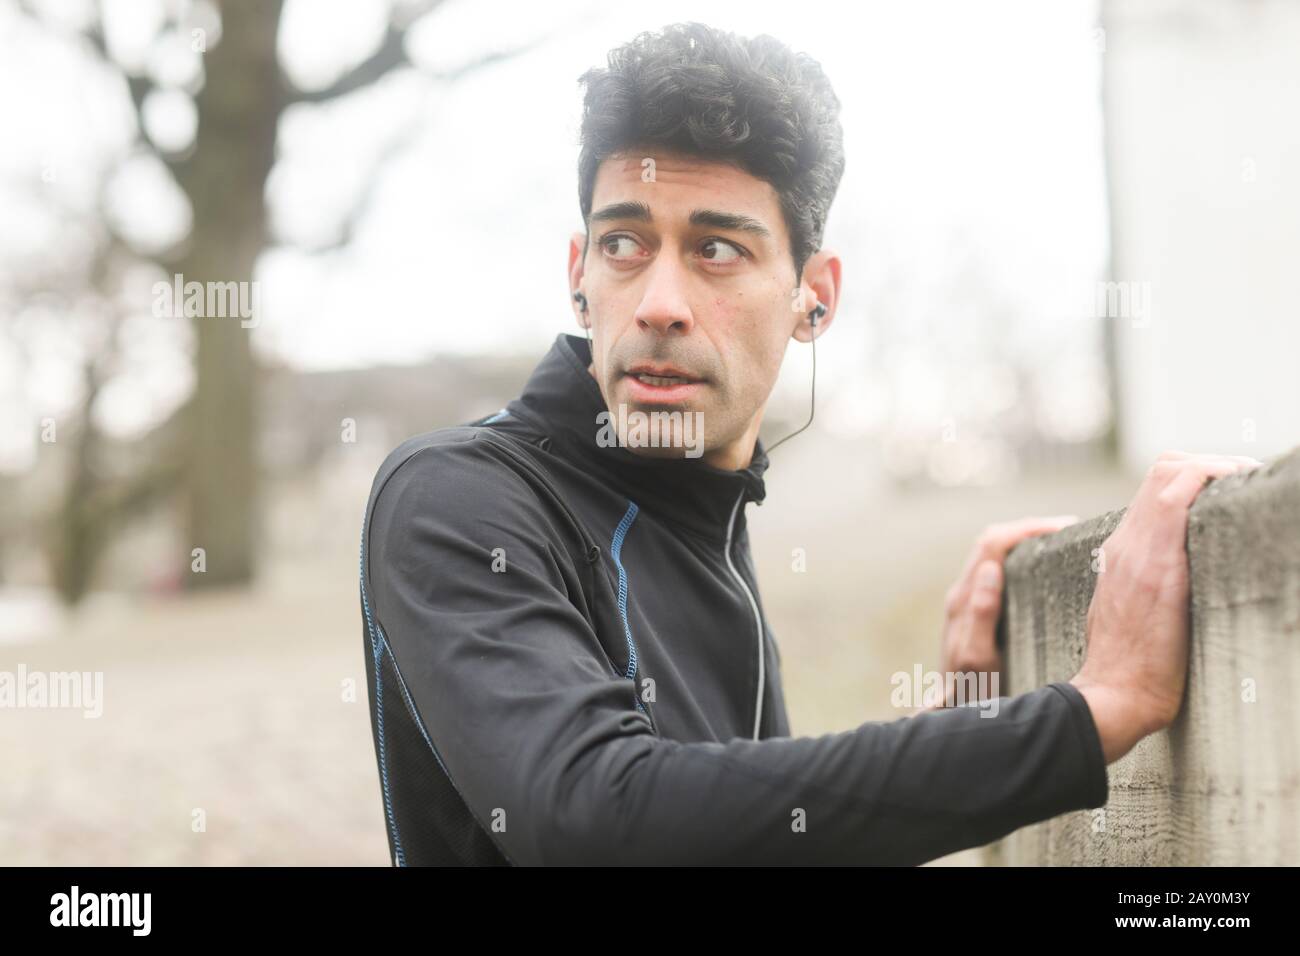 Portrait of a male jogger warming up outside, Germany Stock Photo